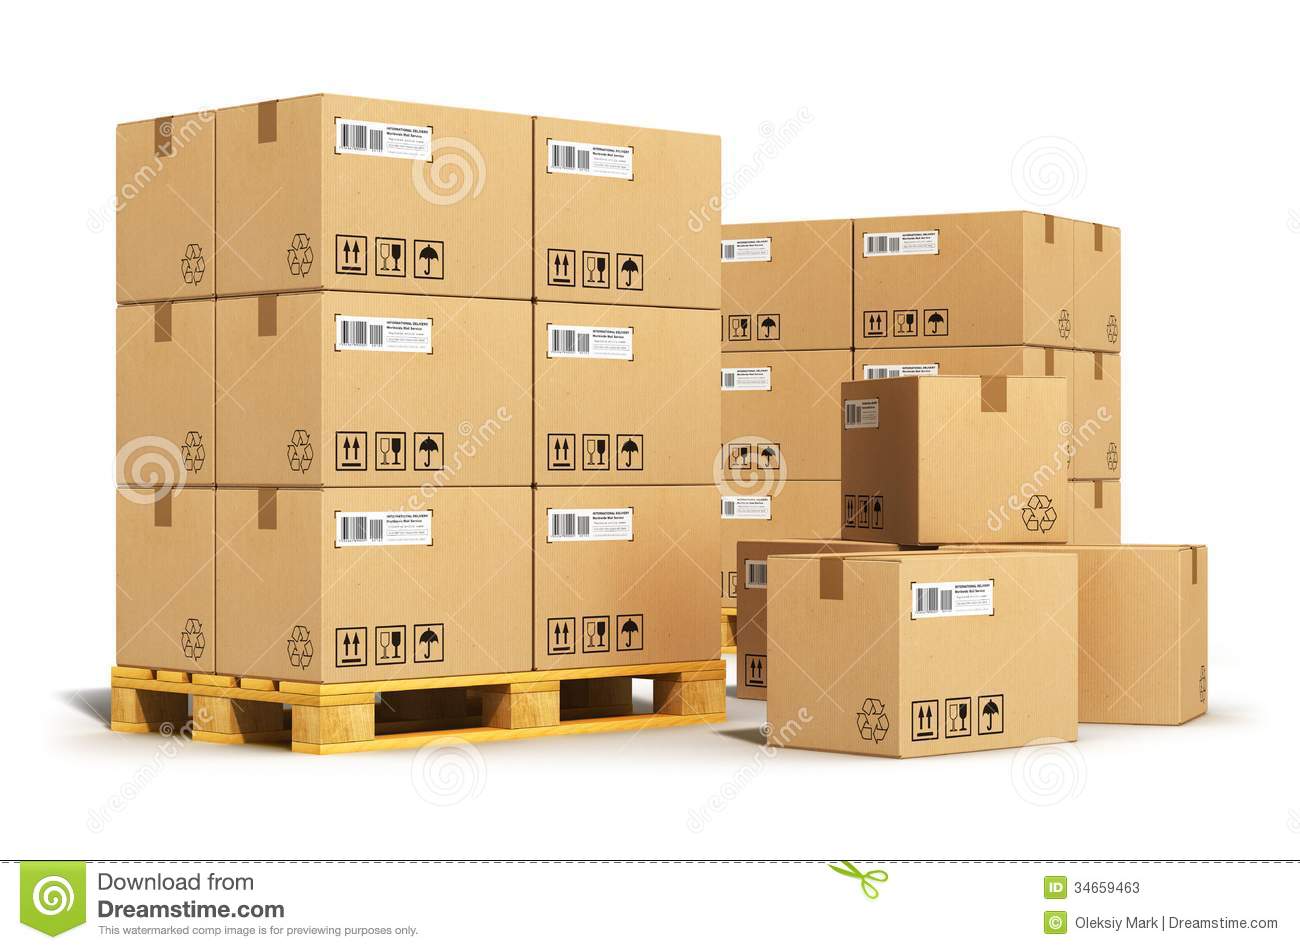 Cardboard Boxes On Shipping Pallets Stock Photos   Image  34659463